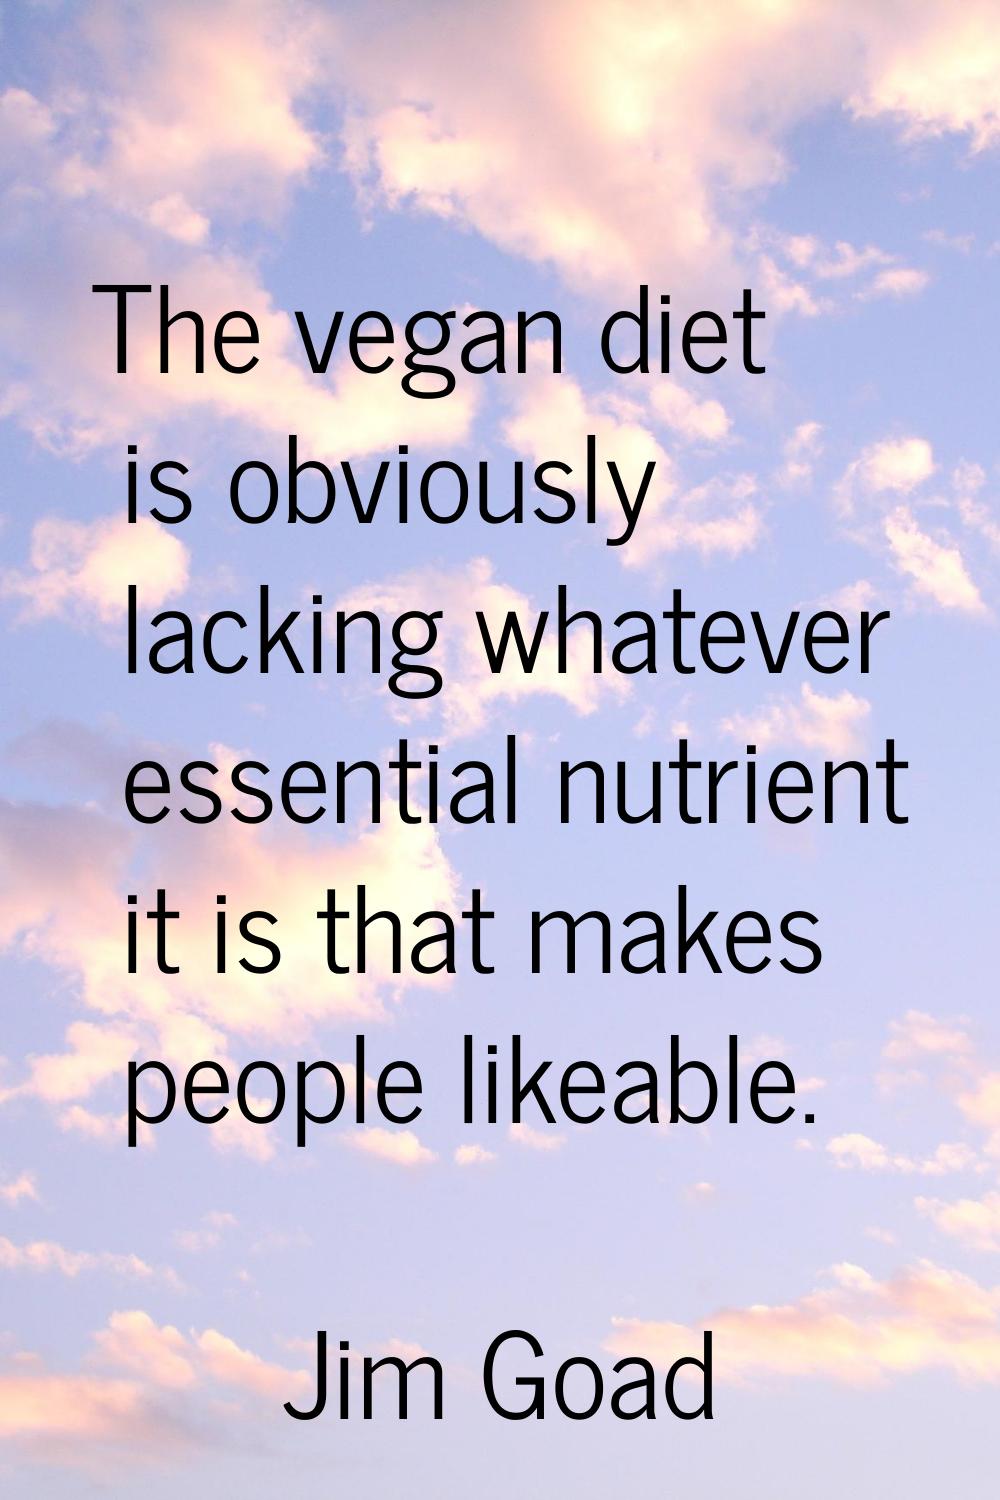 The vegan diet is obviously lacking whatever essential nutrient it is that makes people likeable.